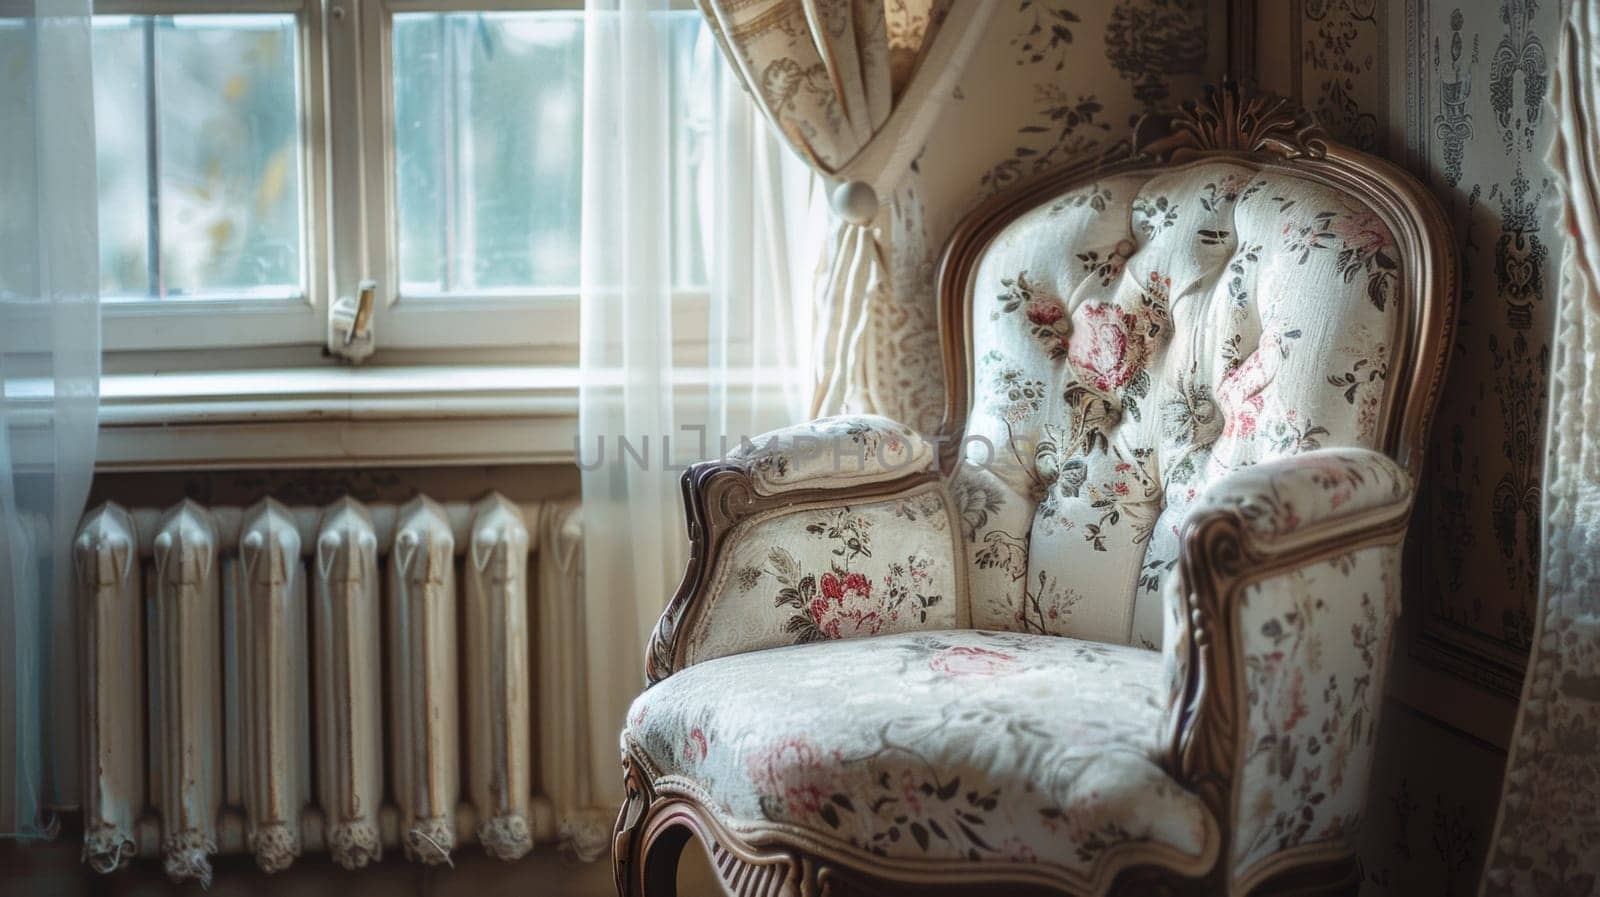 A chair in front of a window with floral patterned fabric, AI by starush